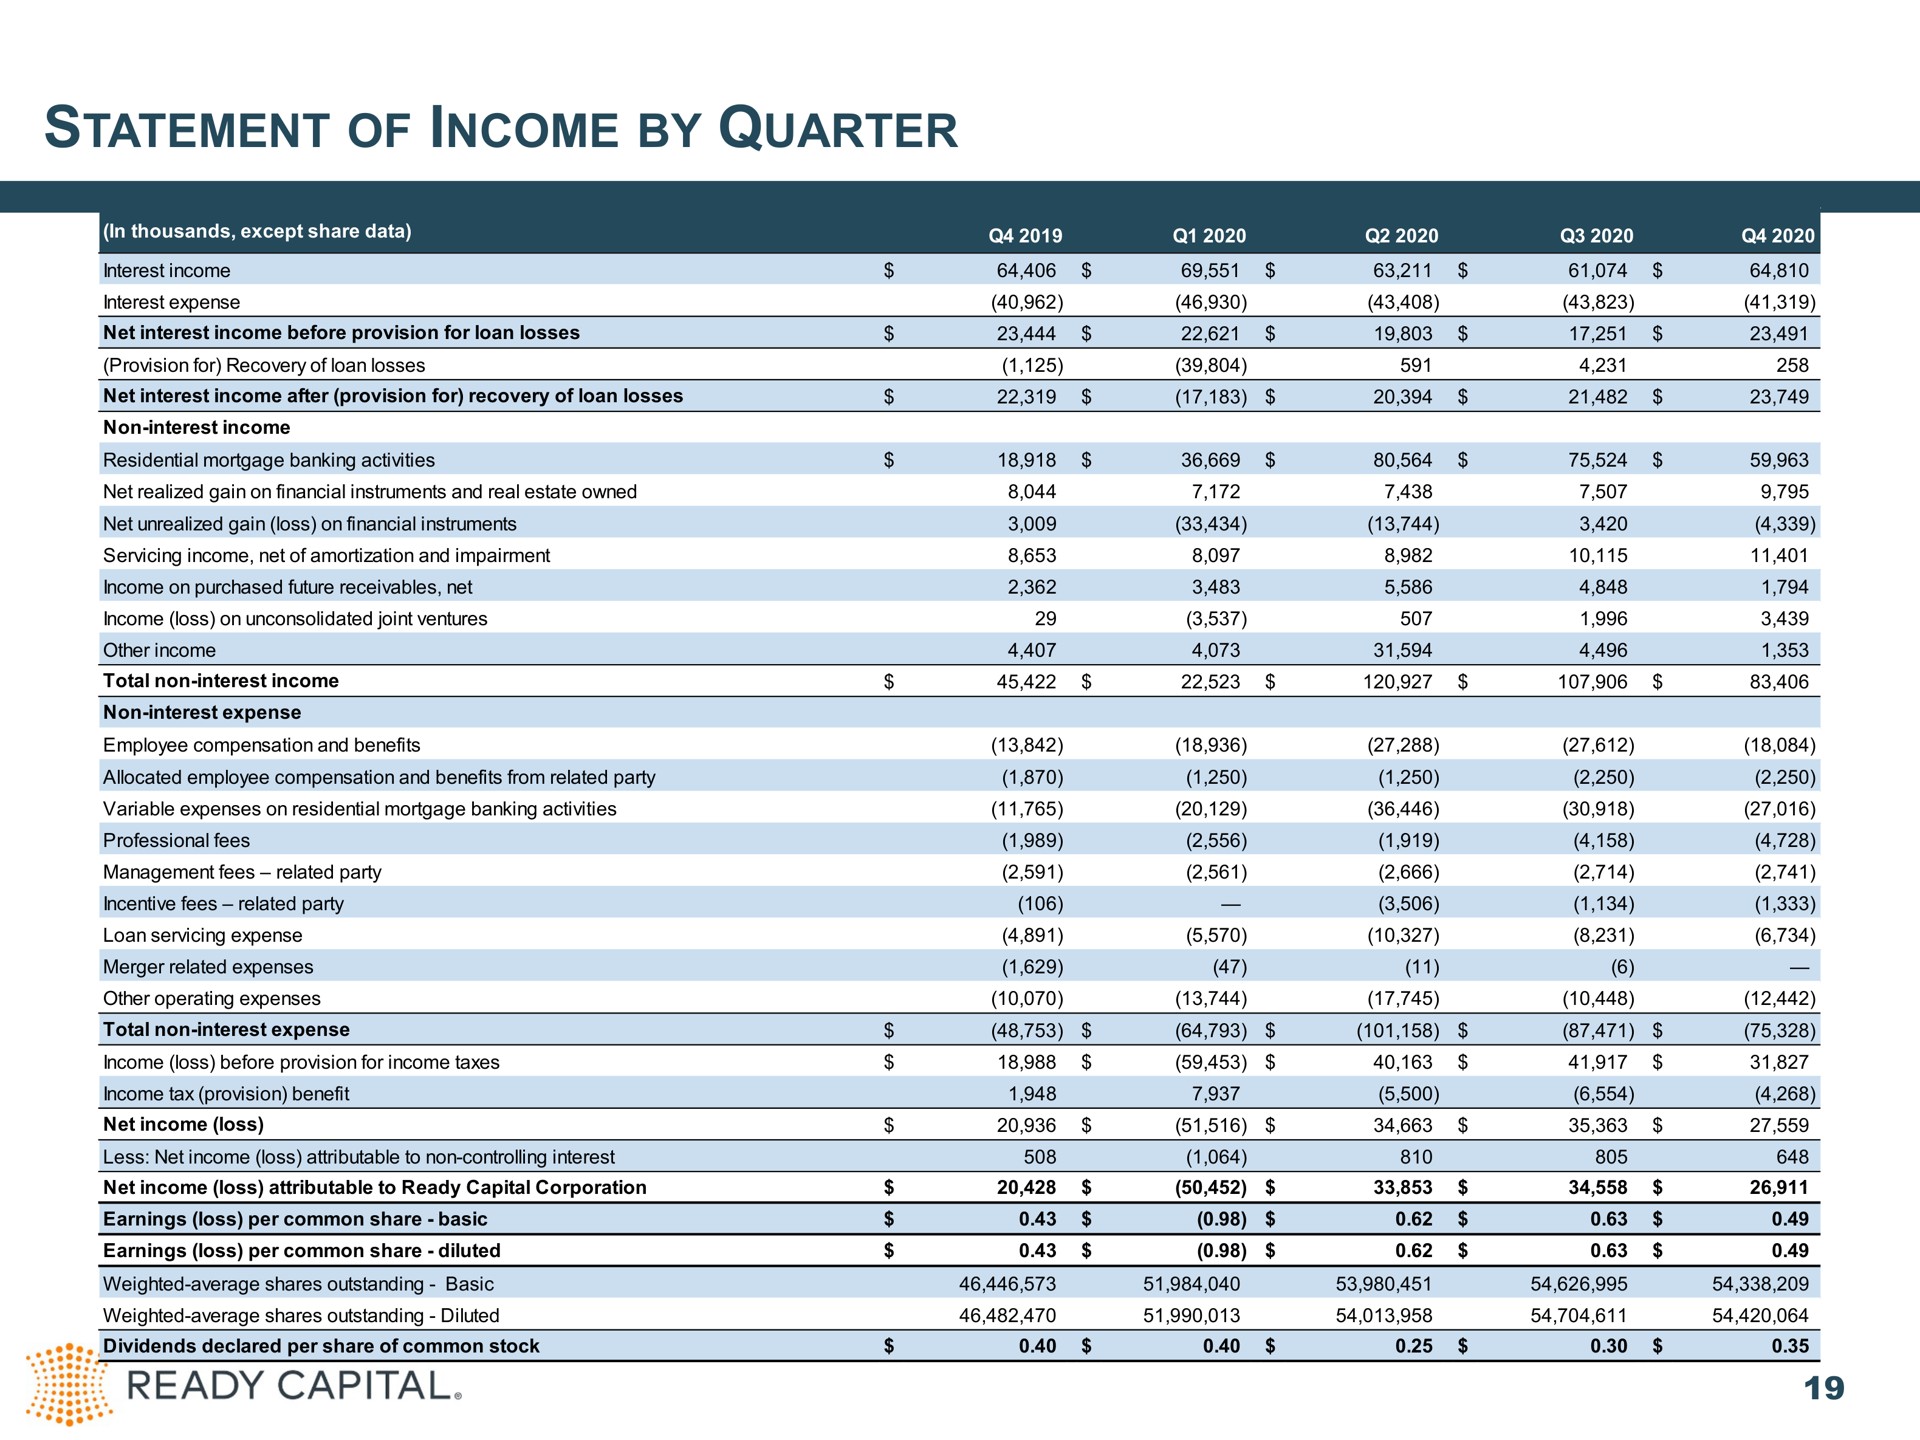 statement of income by quarter ready capital | Ready Capital